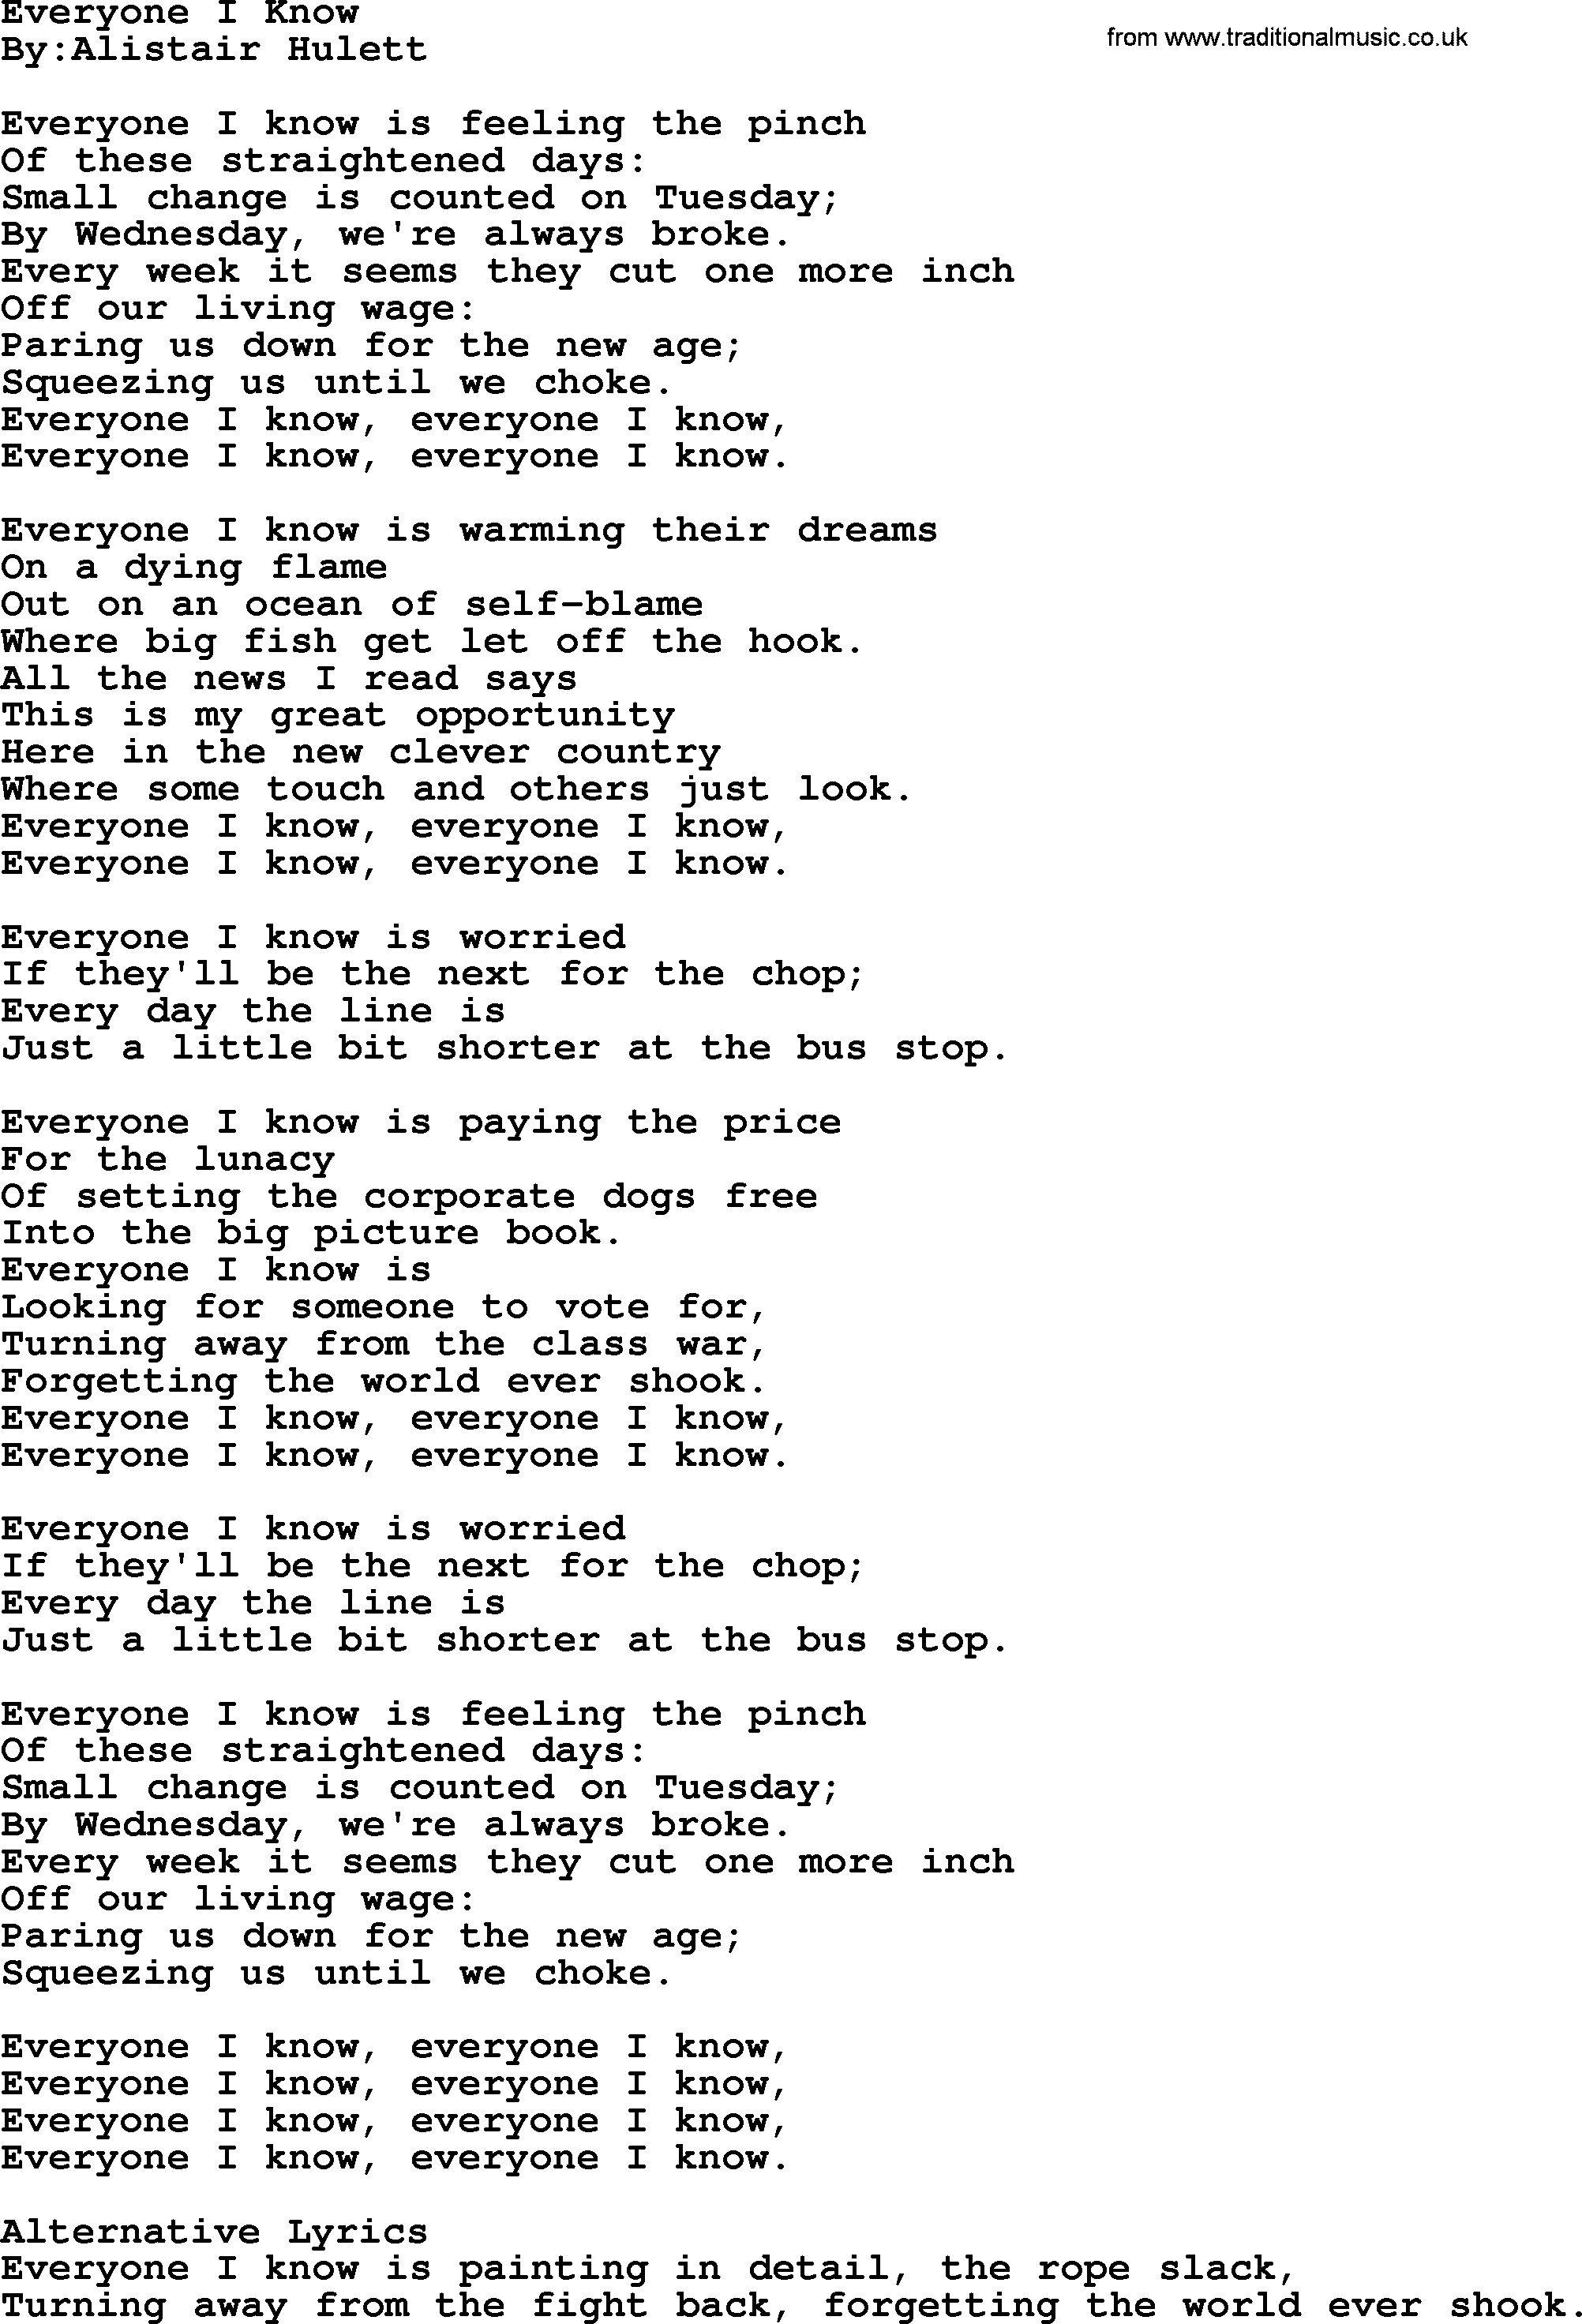 Political, Solidarity, Workers or Union song: Everyone I Know, lyrics